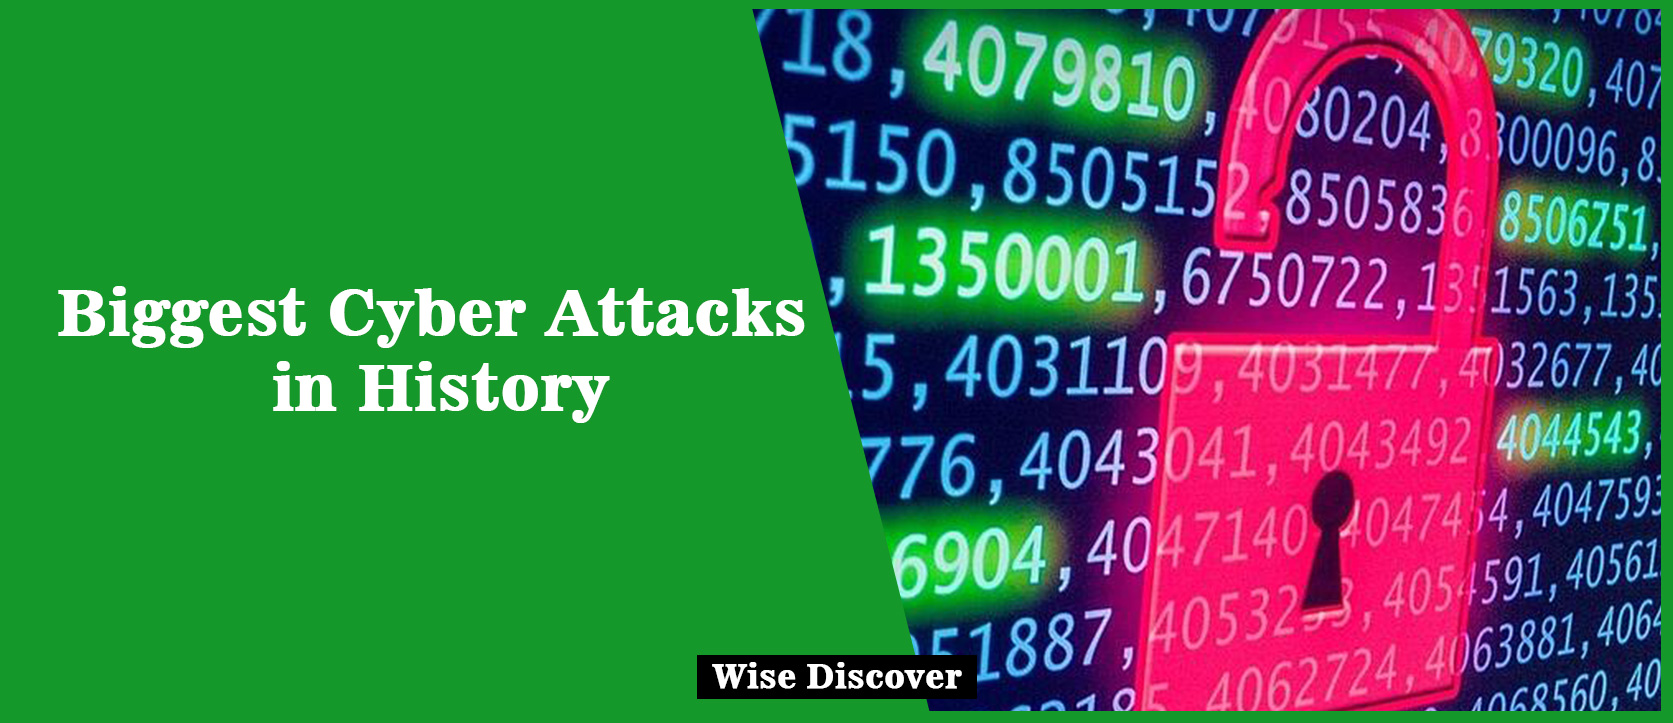 Biggest-Cyber-Attacks-in-History